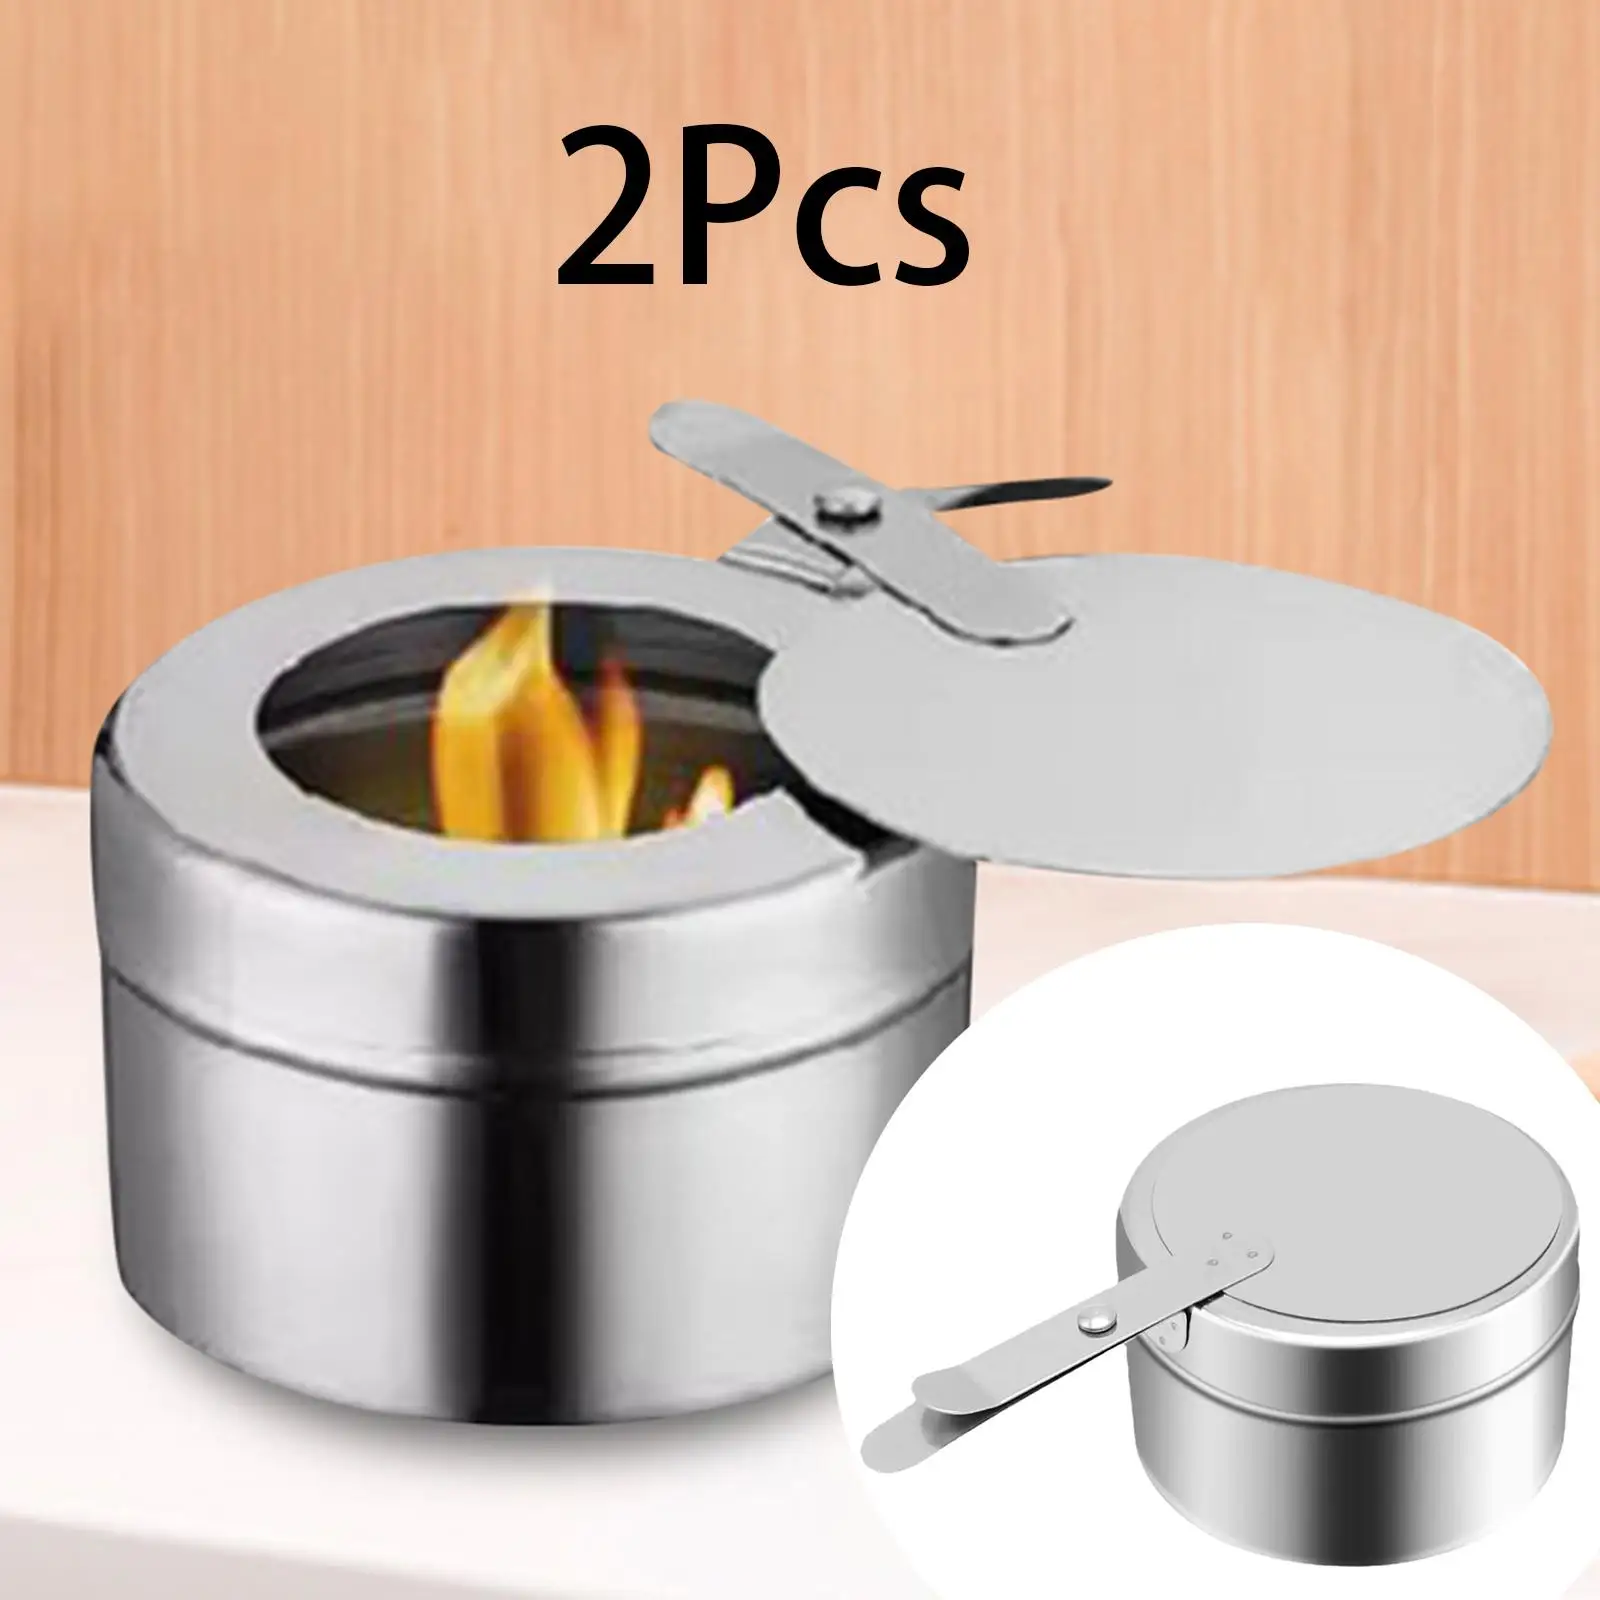 2Pcs Parties Fuel Cans Holder Set Chafer Canned Buffet Warmer Warming Trays for Barbecue Catering Events Buffet Party Supplies